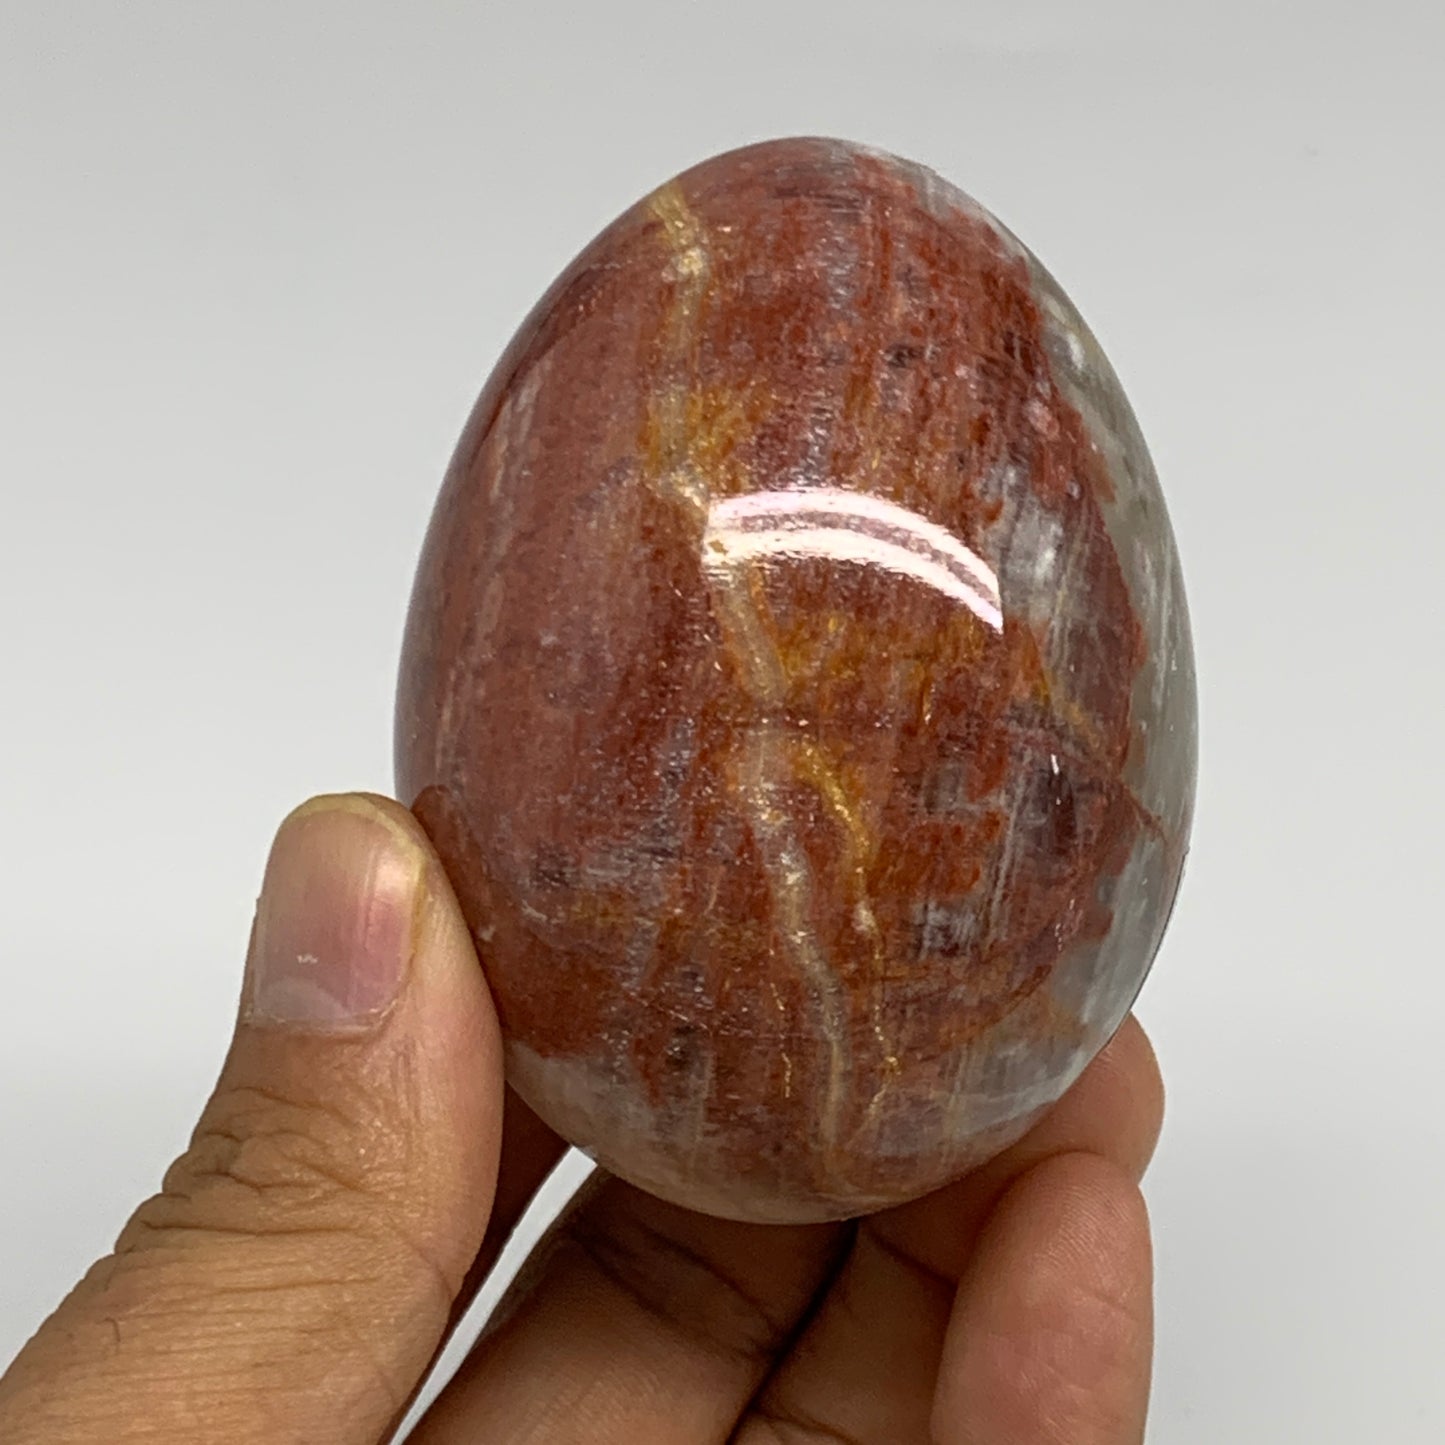 255g, 2.7"x2" Natural Green Onyx Egg Gemstone Mineral, from Pakistan, B32027